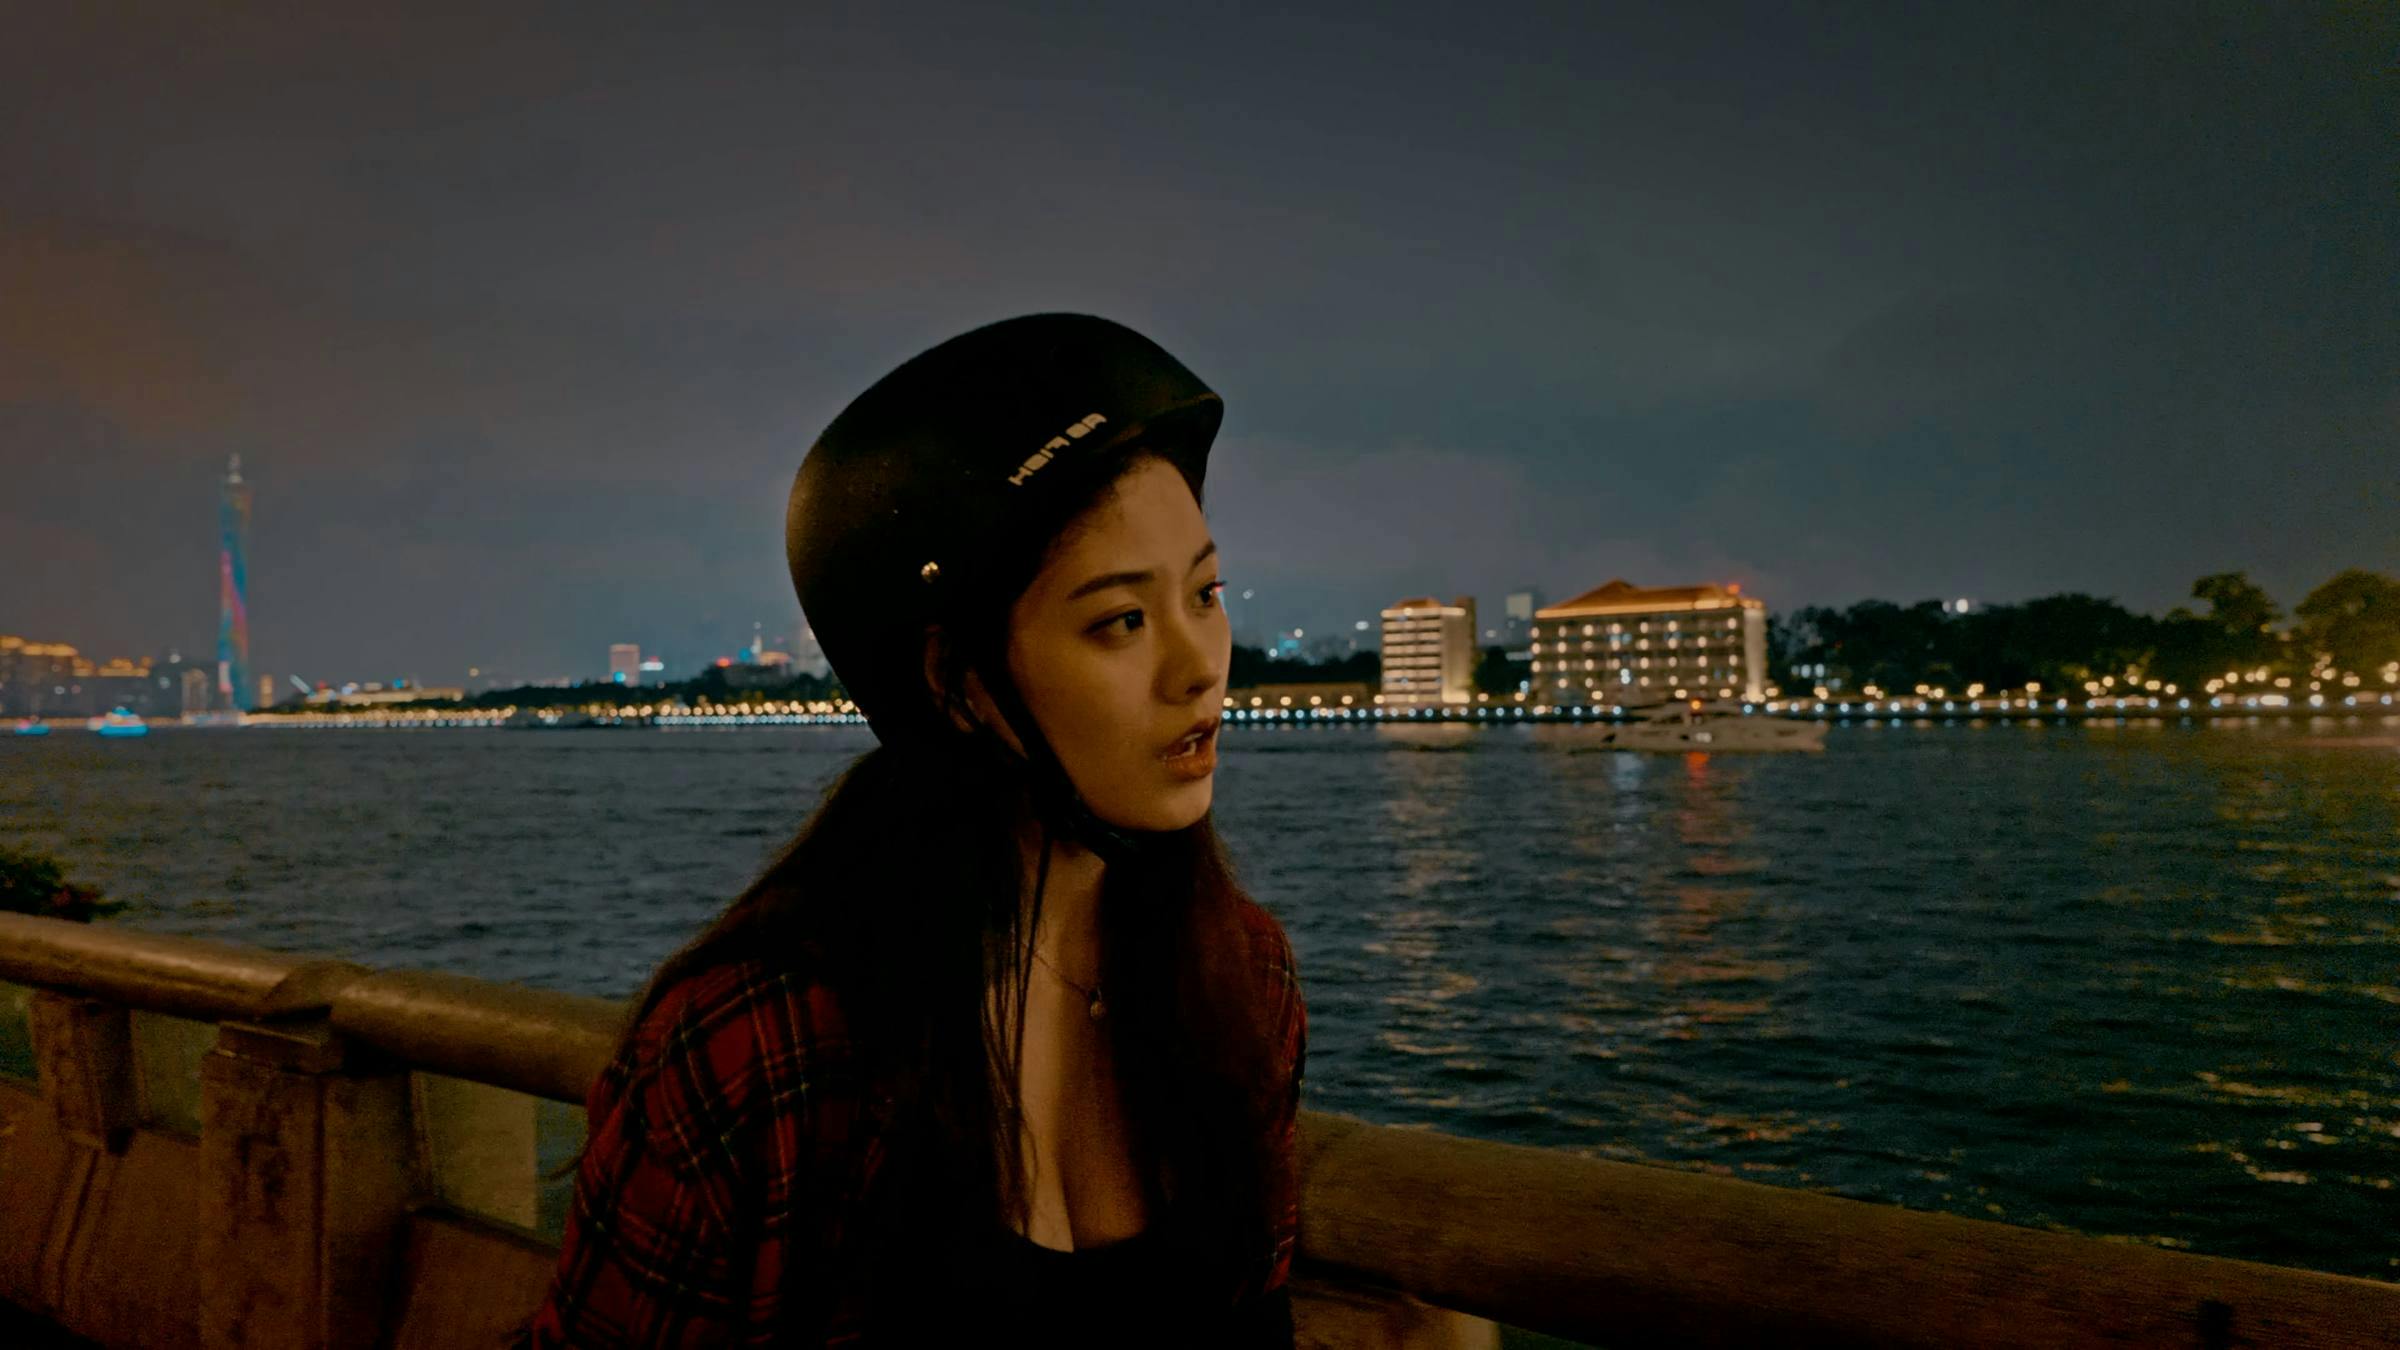 Image of a person wearing a black scooter helmet, stood in front of a fence with water behind them. The image is at night and there are lots of lights from nearby buildings reflecting on the water.